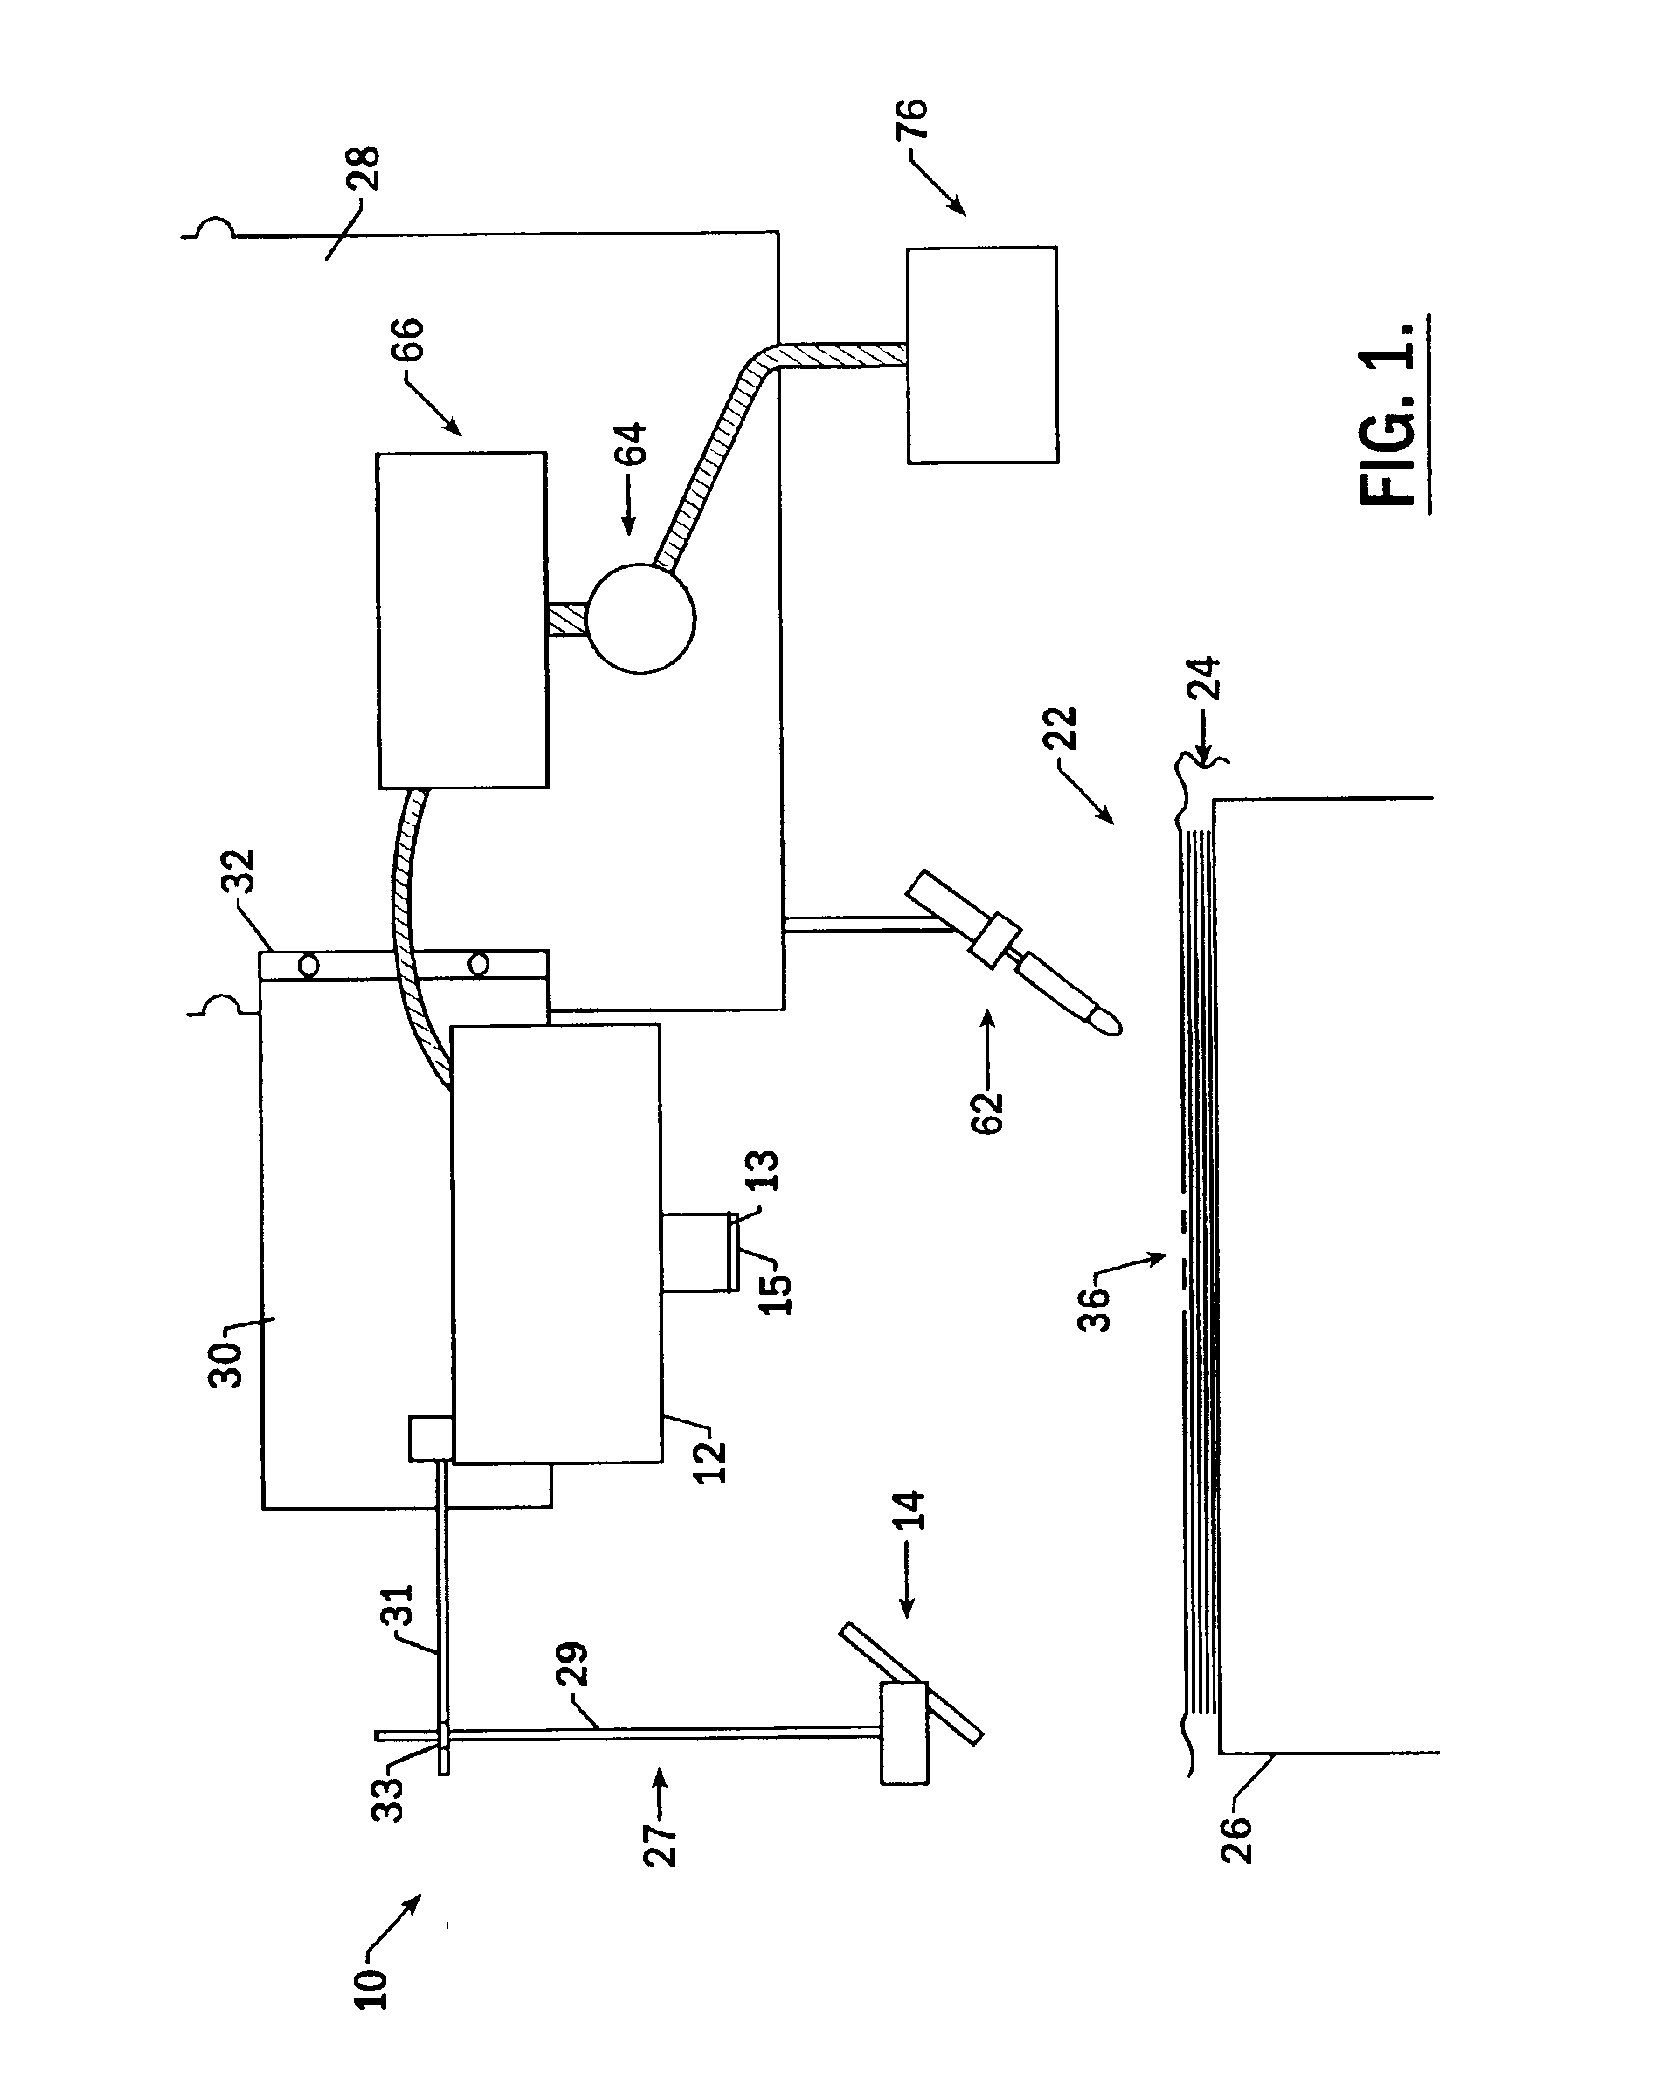 System for identifying defects in a composite structure